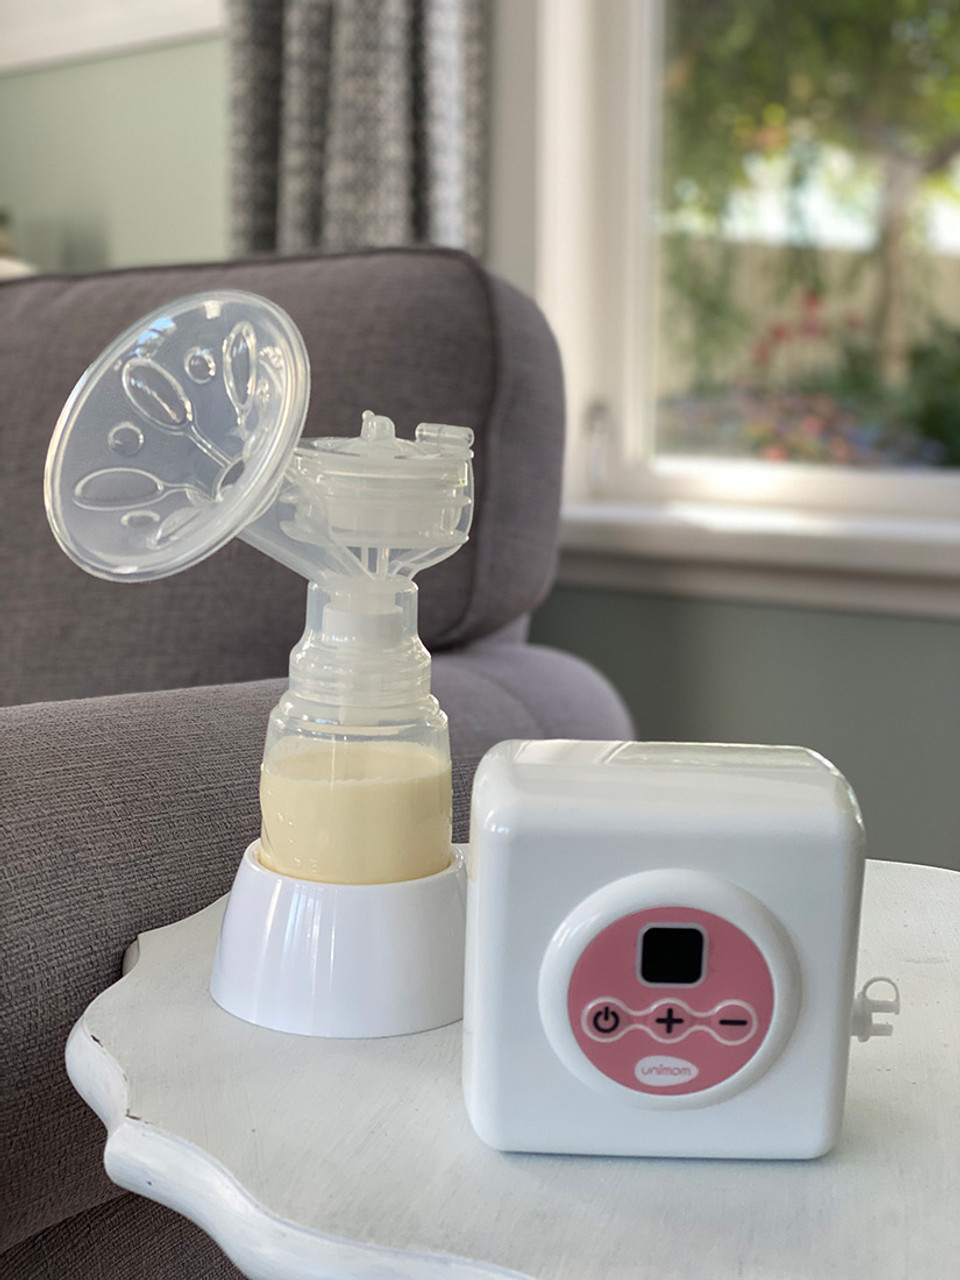 Made for Me™ Single Manual Breast Pump